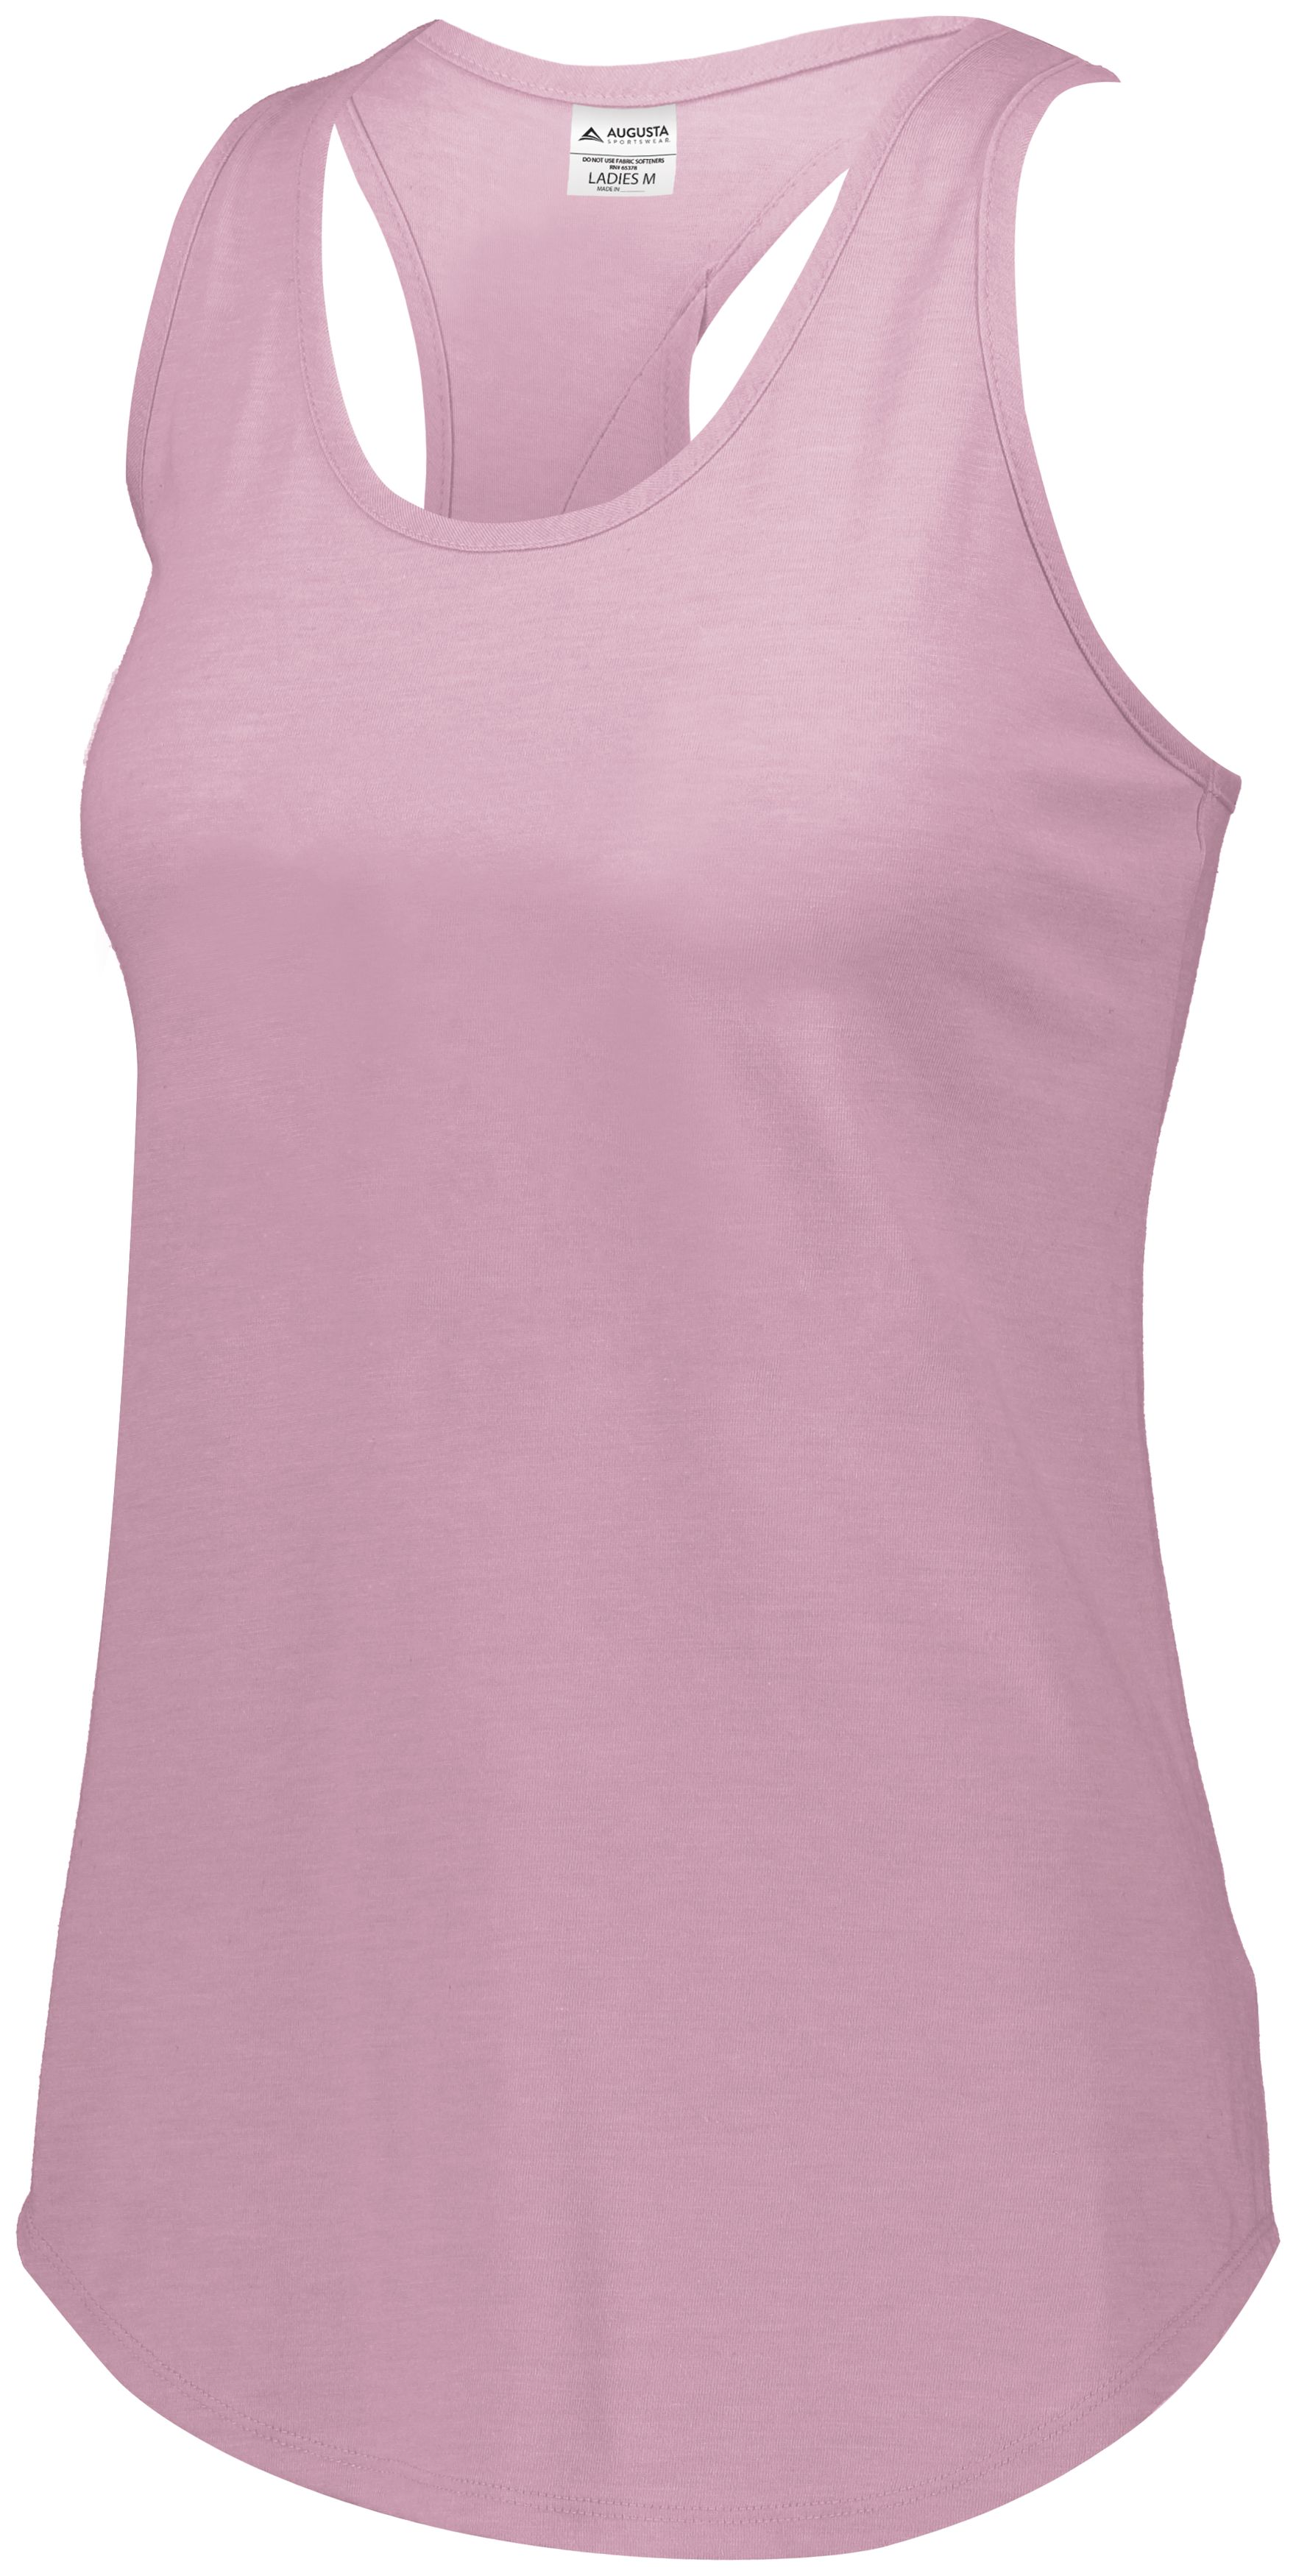 click to view Dusty Rose Heather